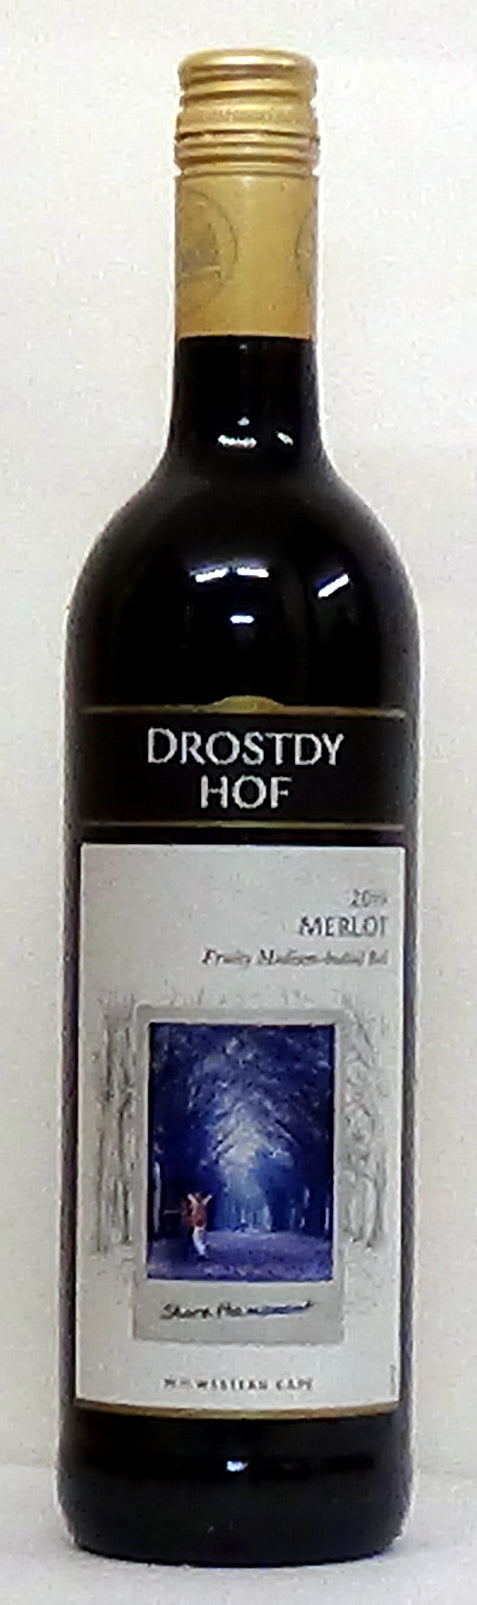 2019 Drostdy Hof Merlot Western Cape South Africa - Red Wines - South 